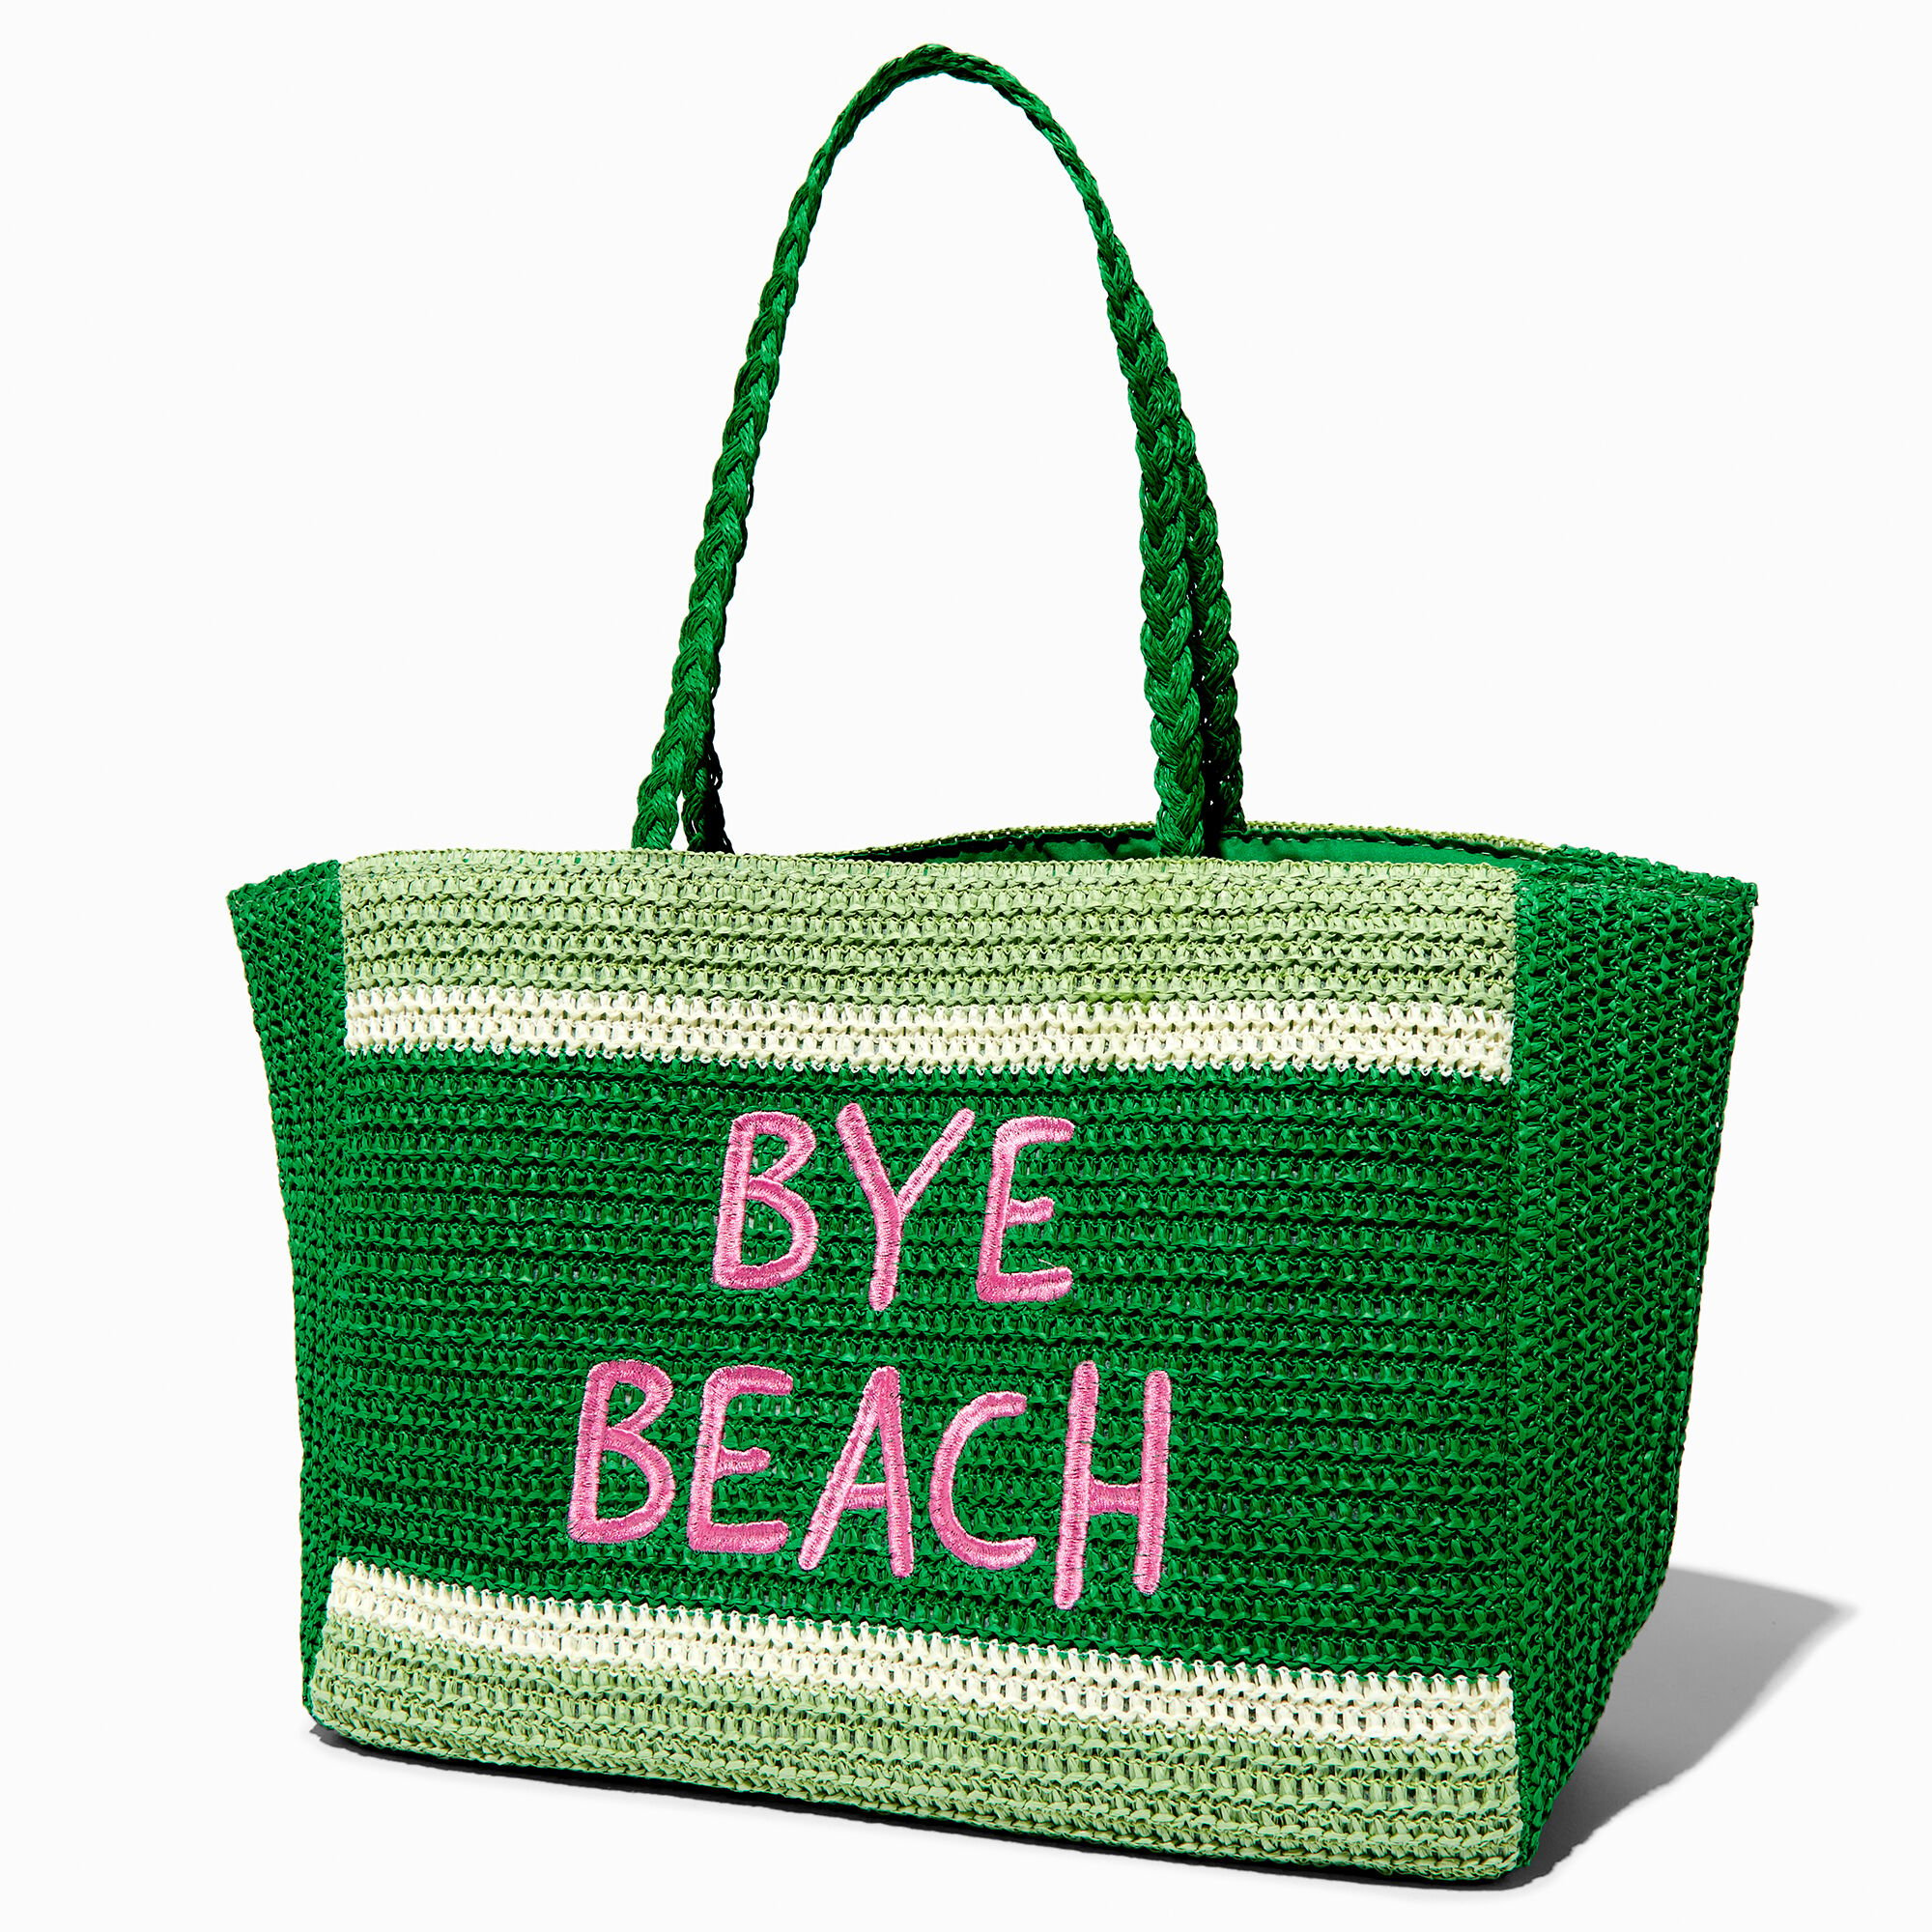 View Claires bye Beach Large Woven Tote Bag information